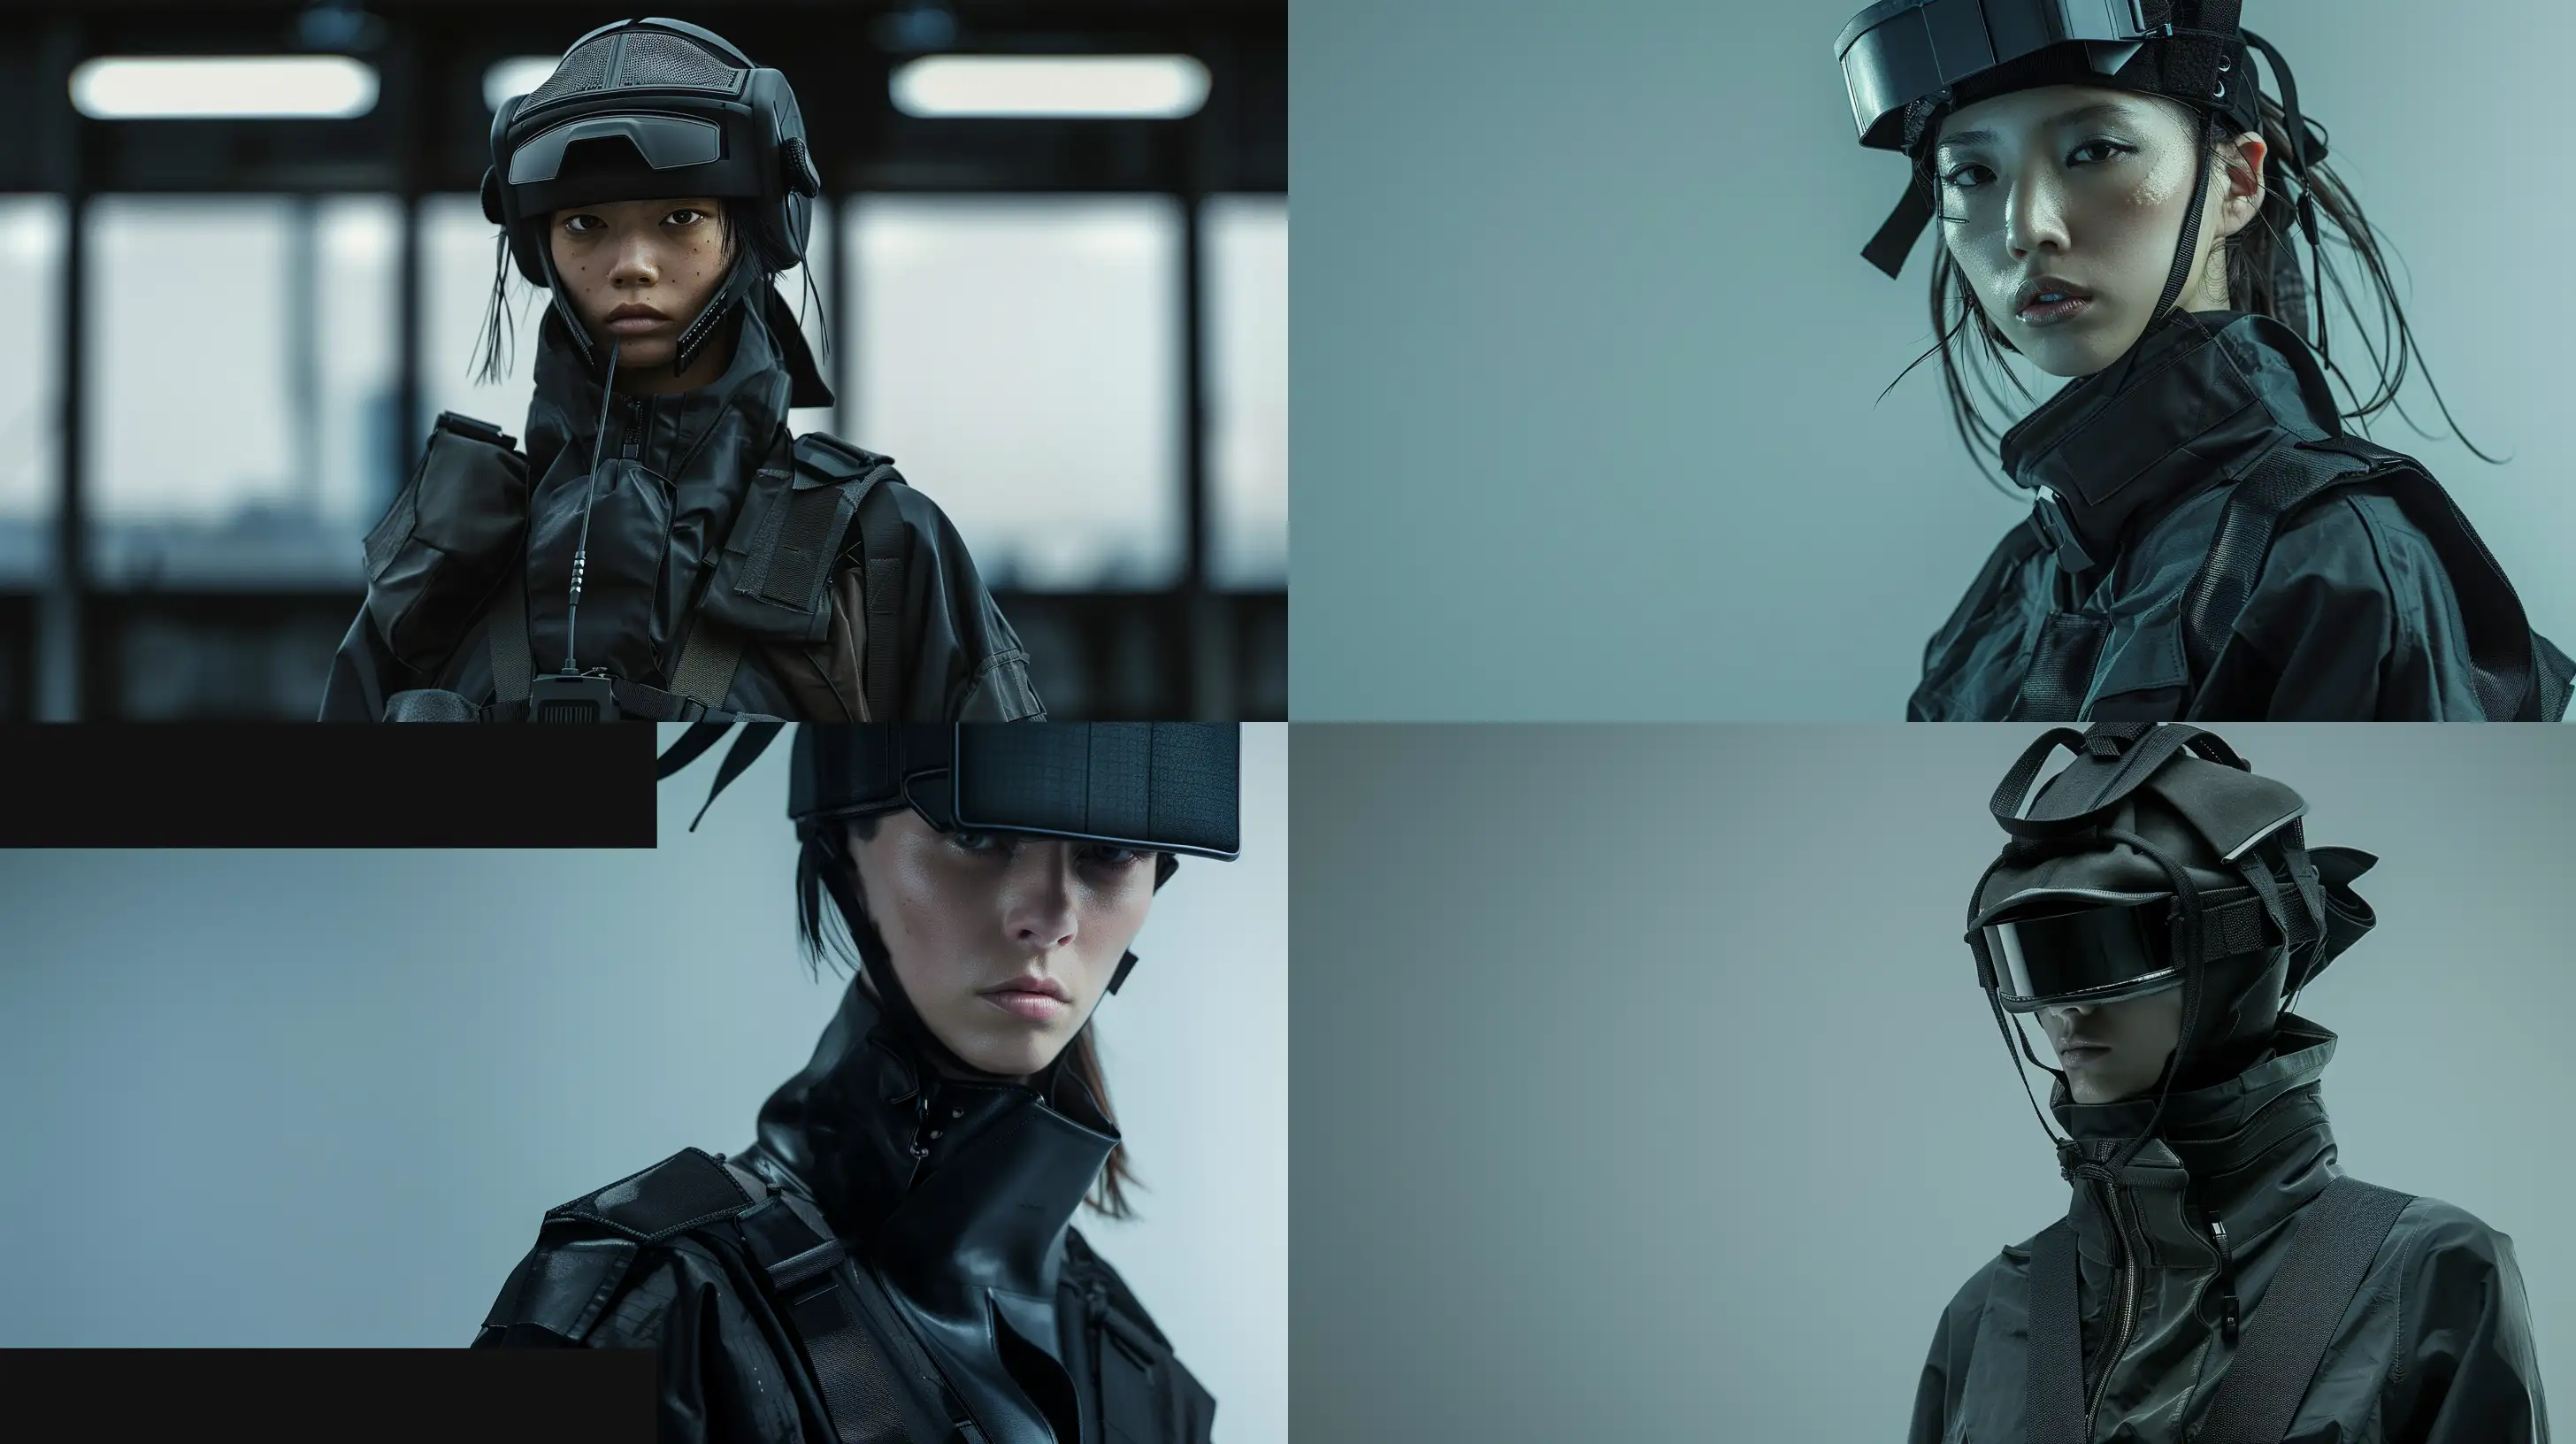 Futuristic-Military-Chic-Outfit-with-Headpiece-on-Dark-Background